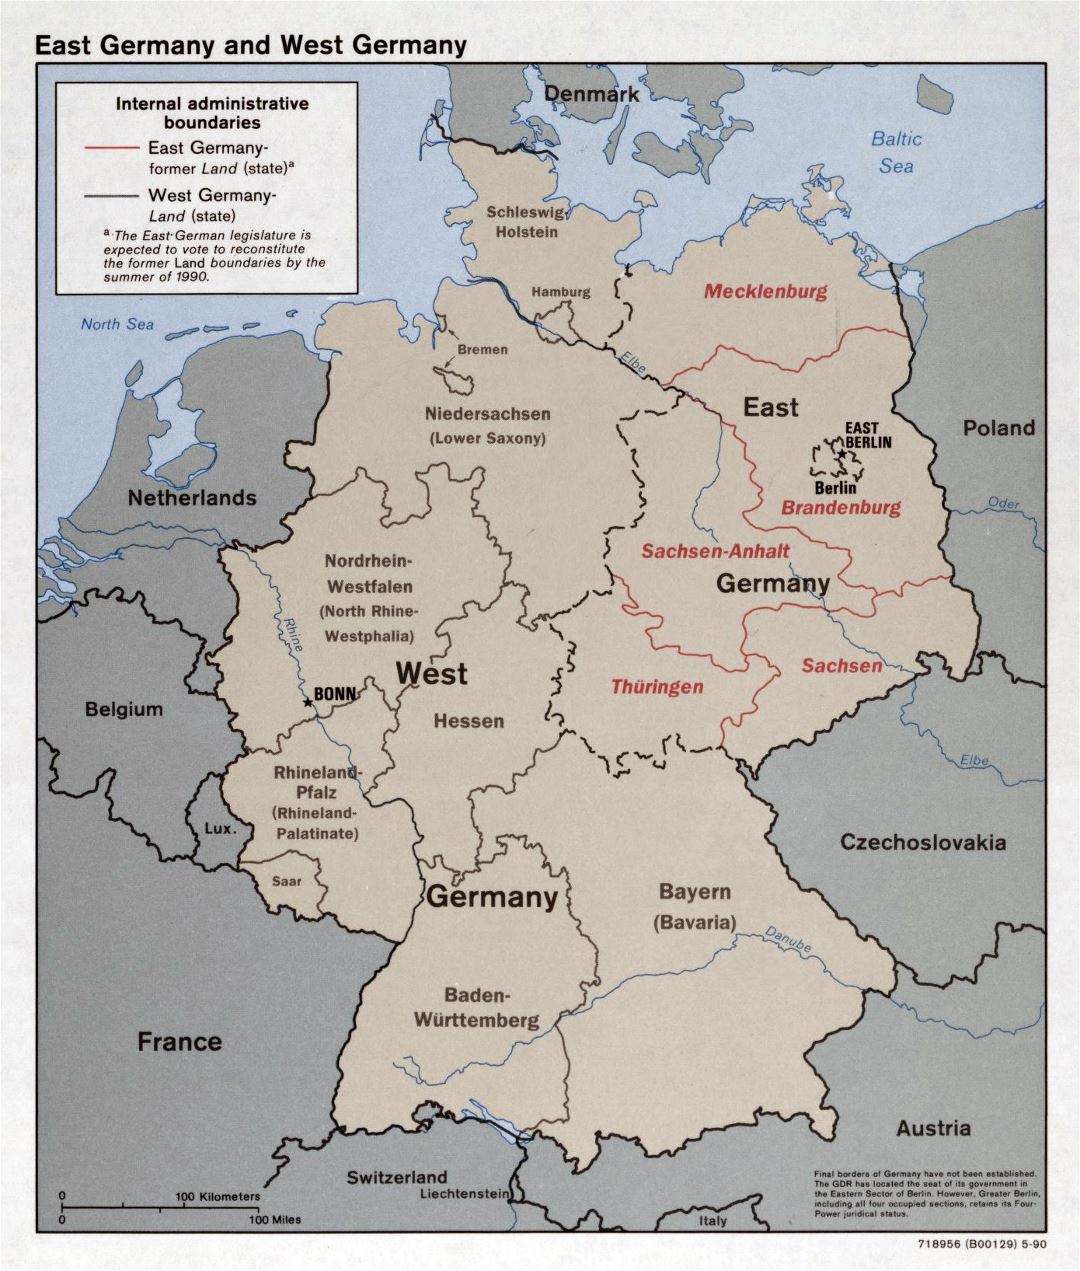 Large Detailed Political And Administrative Map Of East Germany And